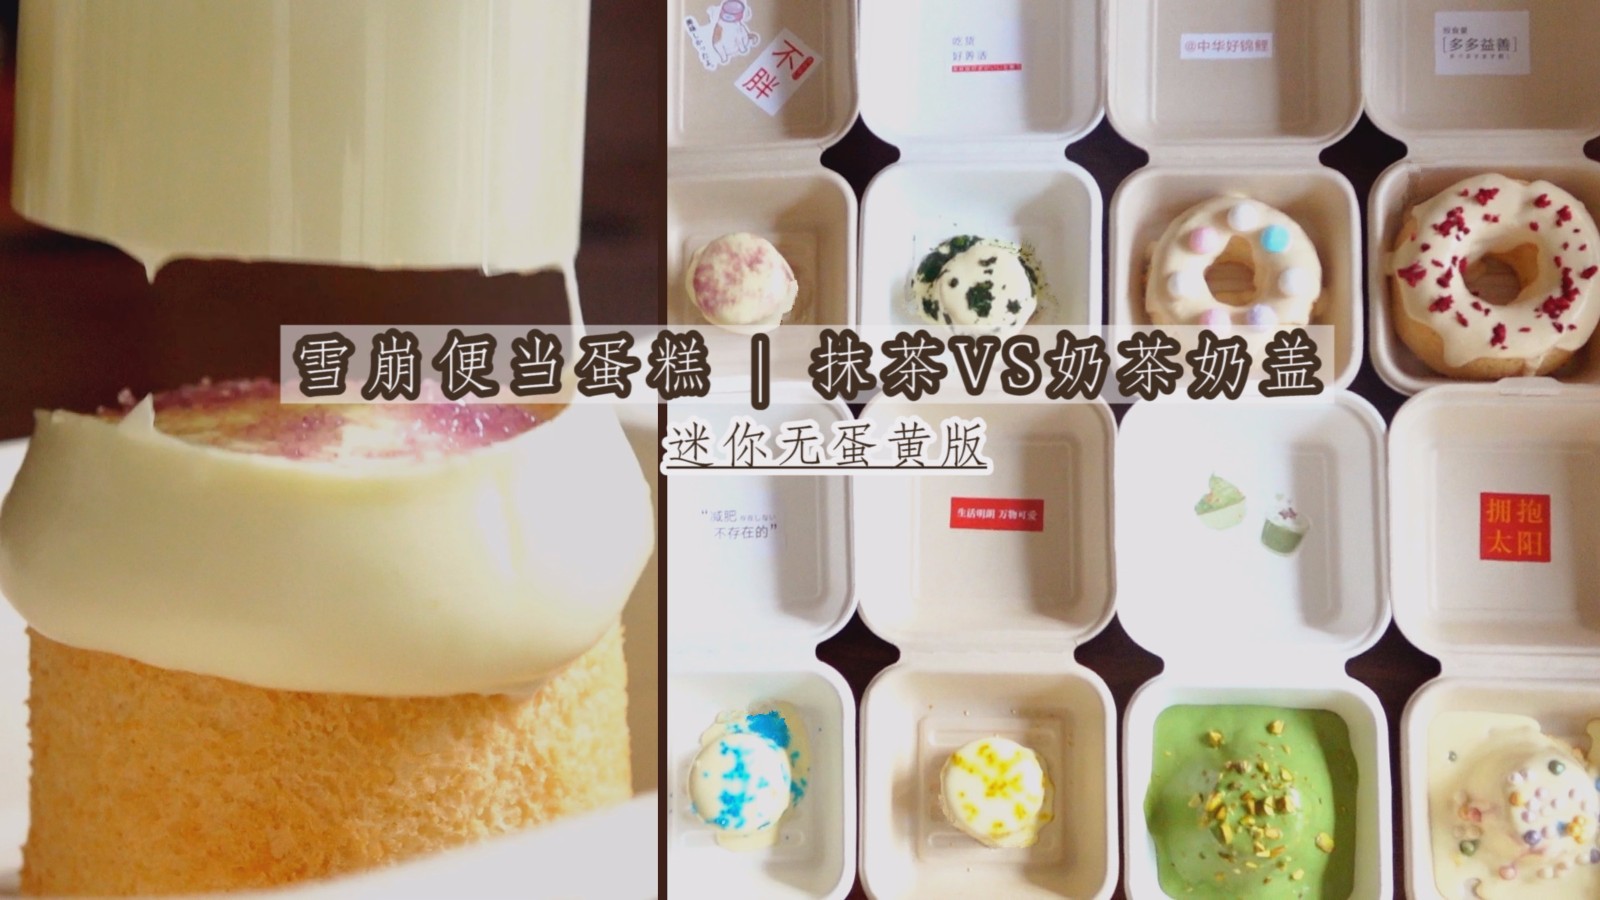 Ins net red Bento Cake Mini you have no yolk version, avalanche cake healing instant